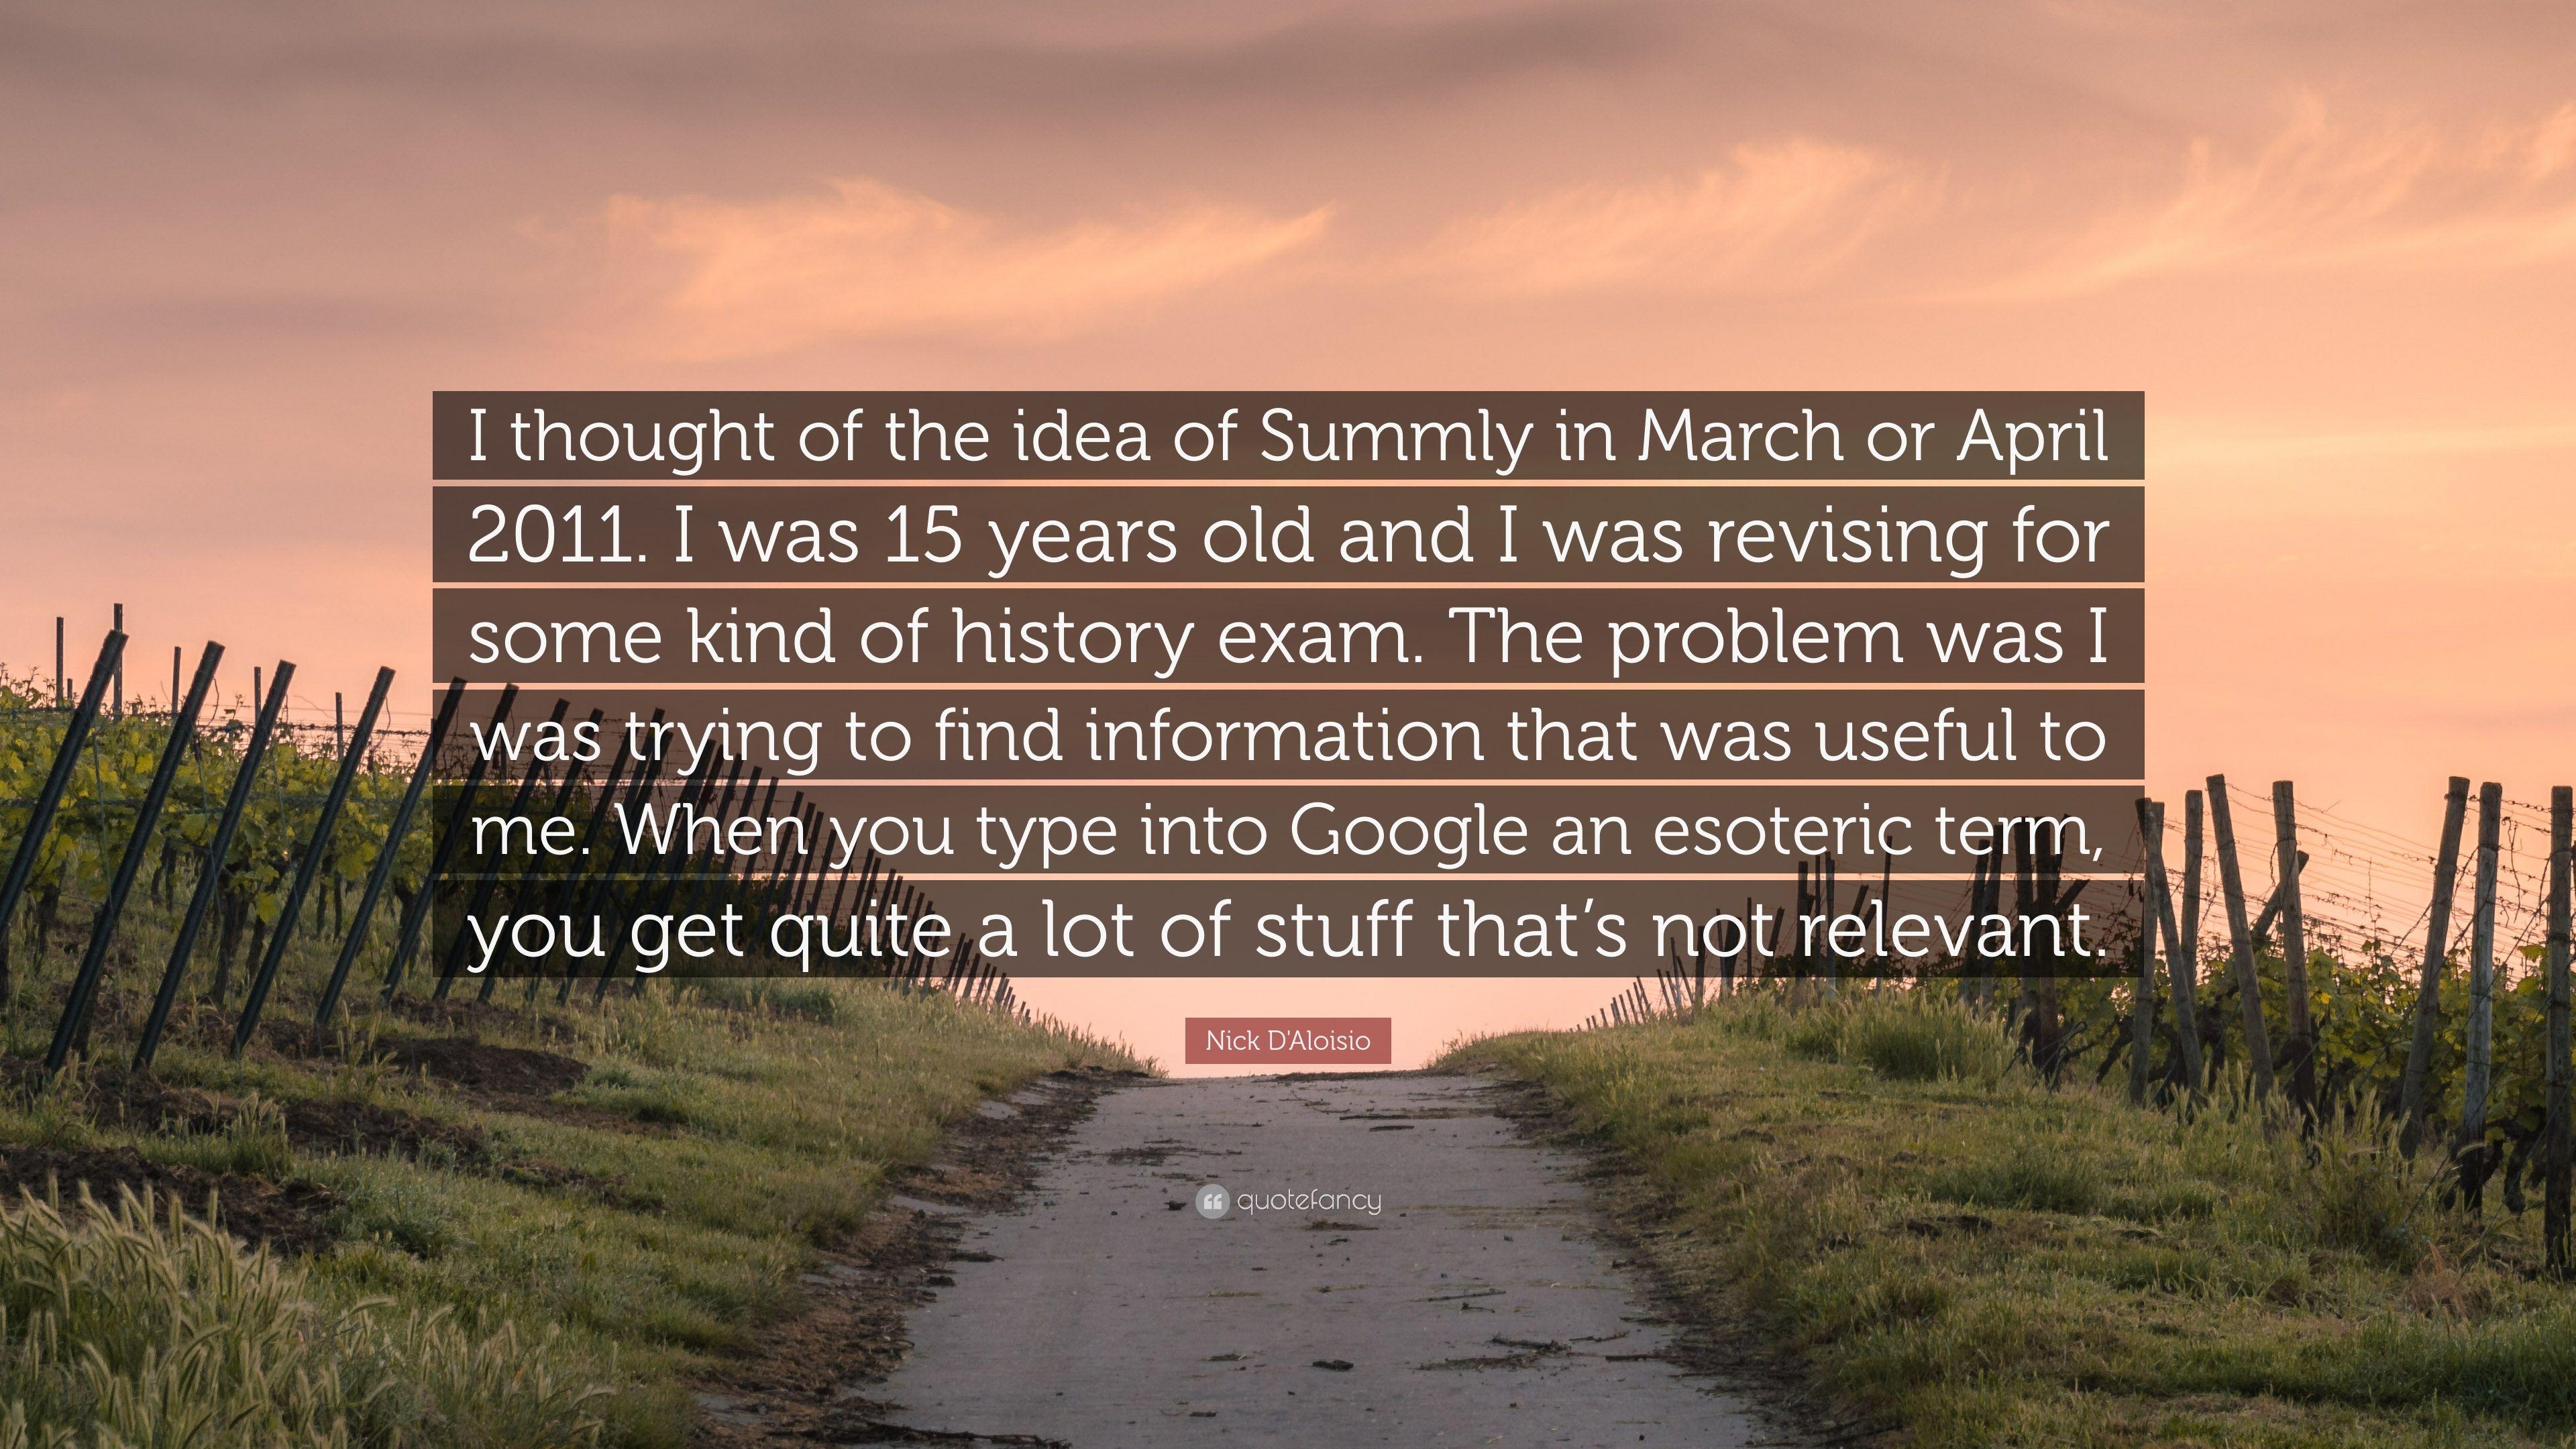 Nick D'Aloisio Quote: “I thought of the idea of Summly in March or